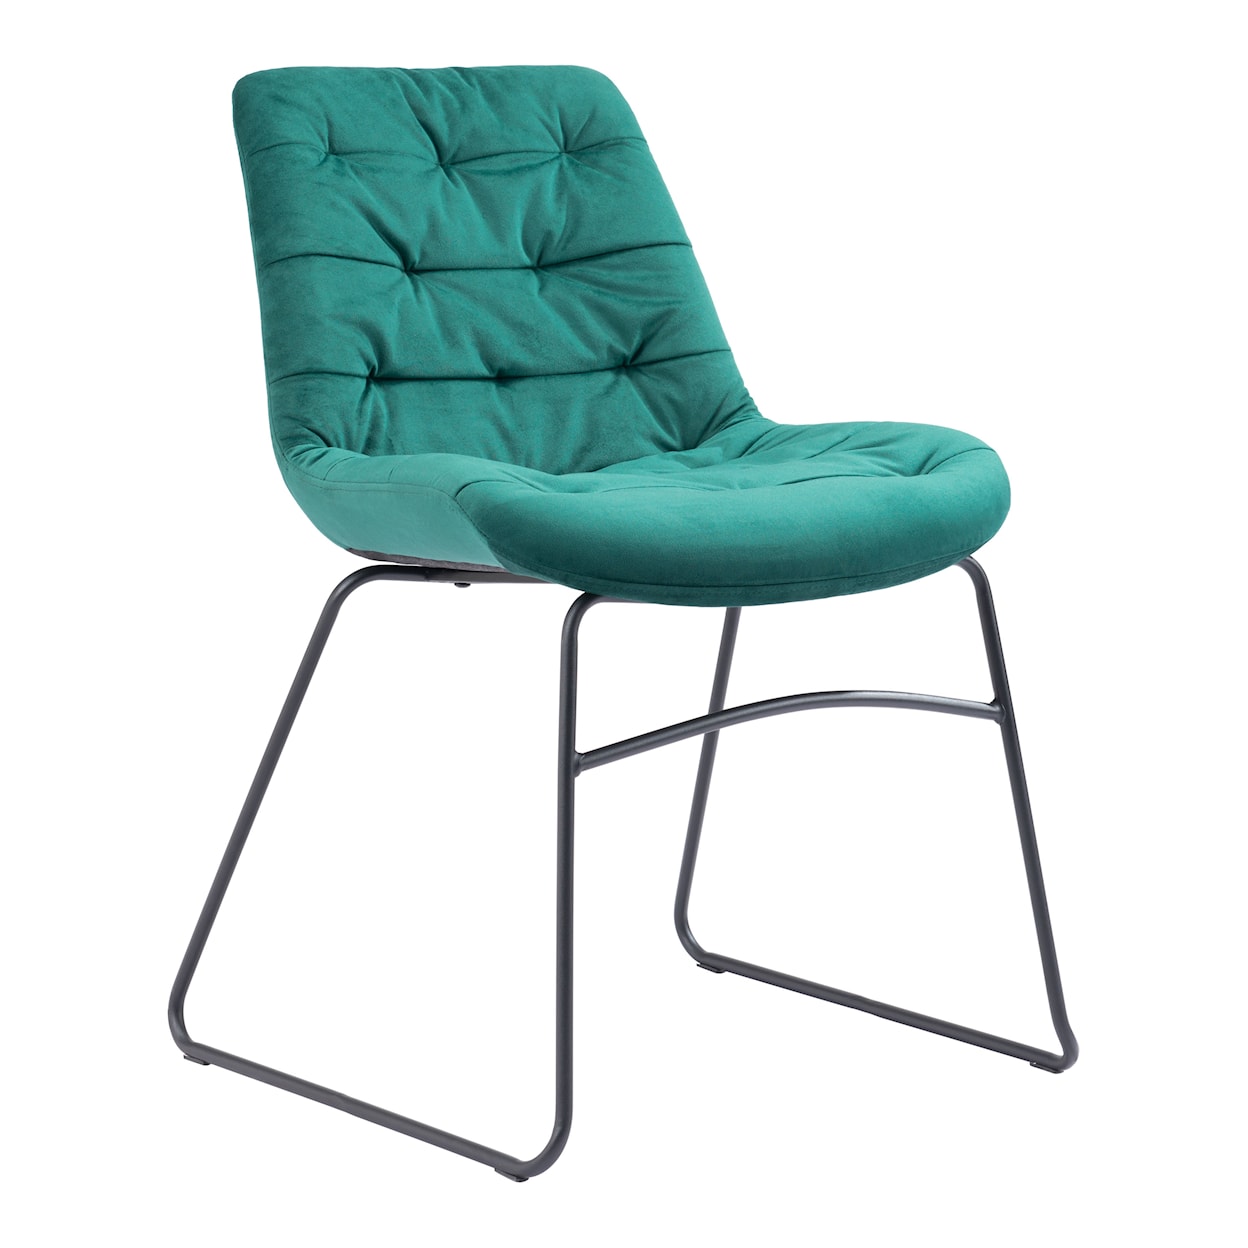 Zuo Tammy Dining Chair